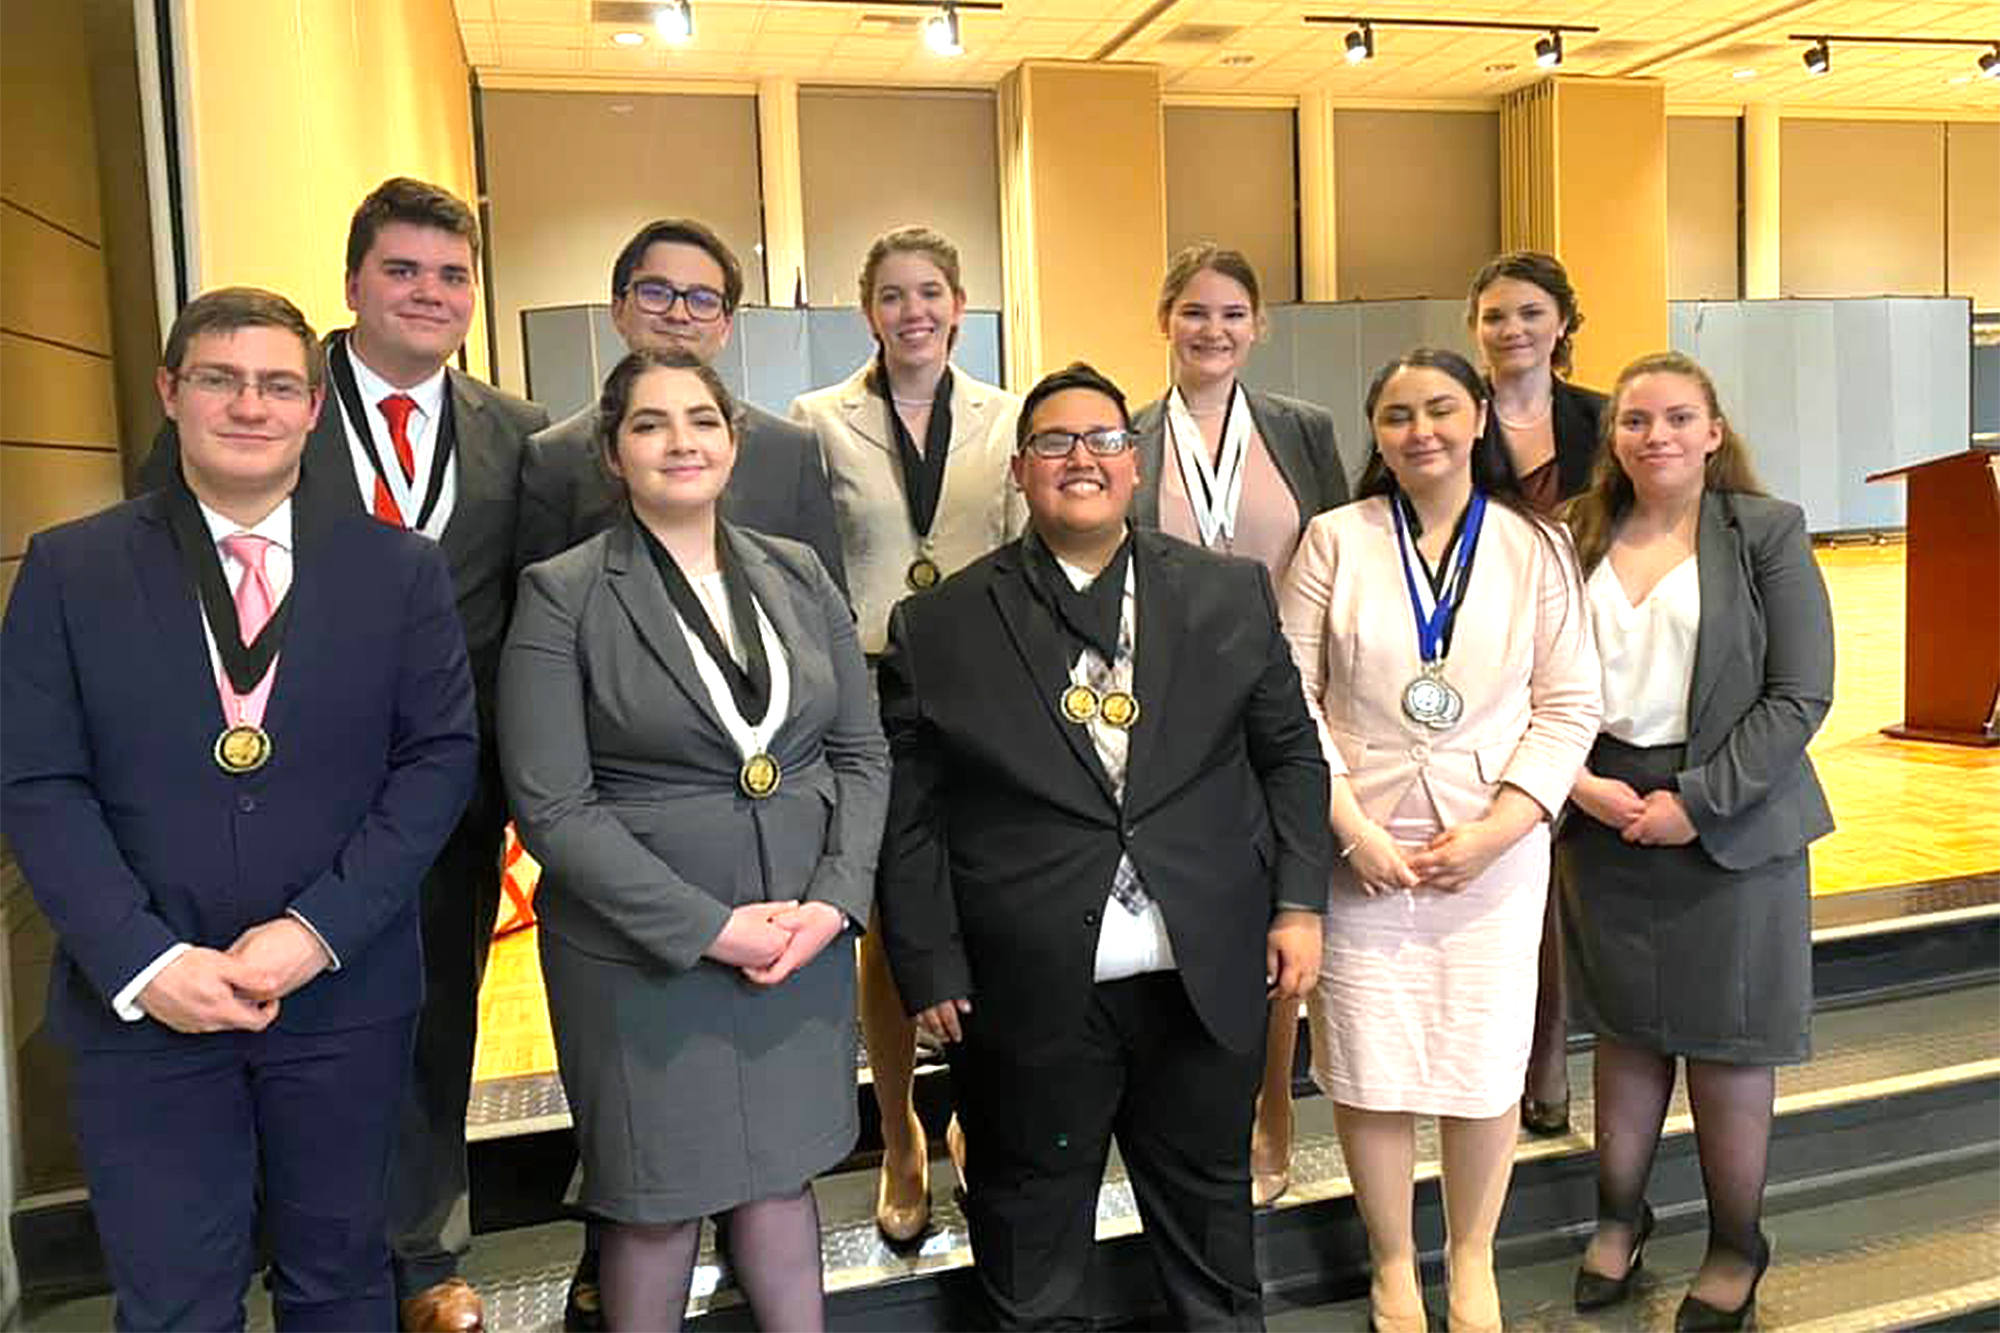 Photo of the Casper College Debate team at the Tabor Venitsky Debate with the medals they won.